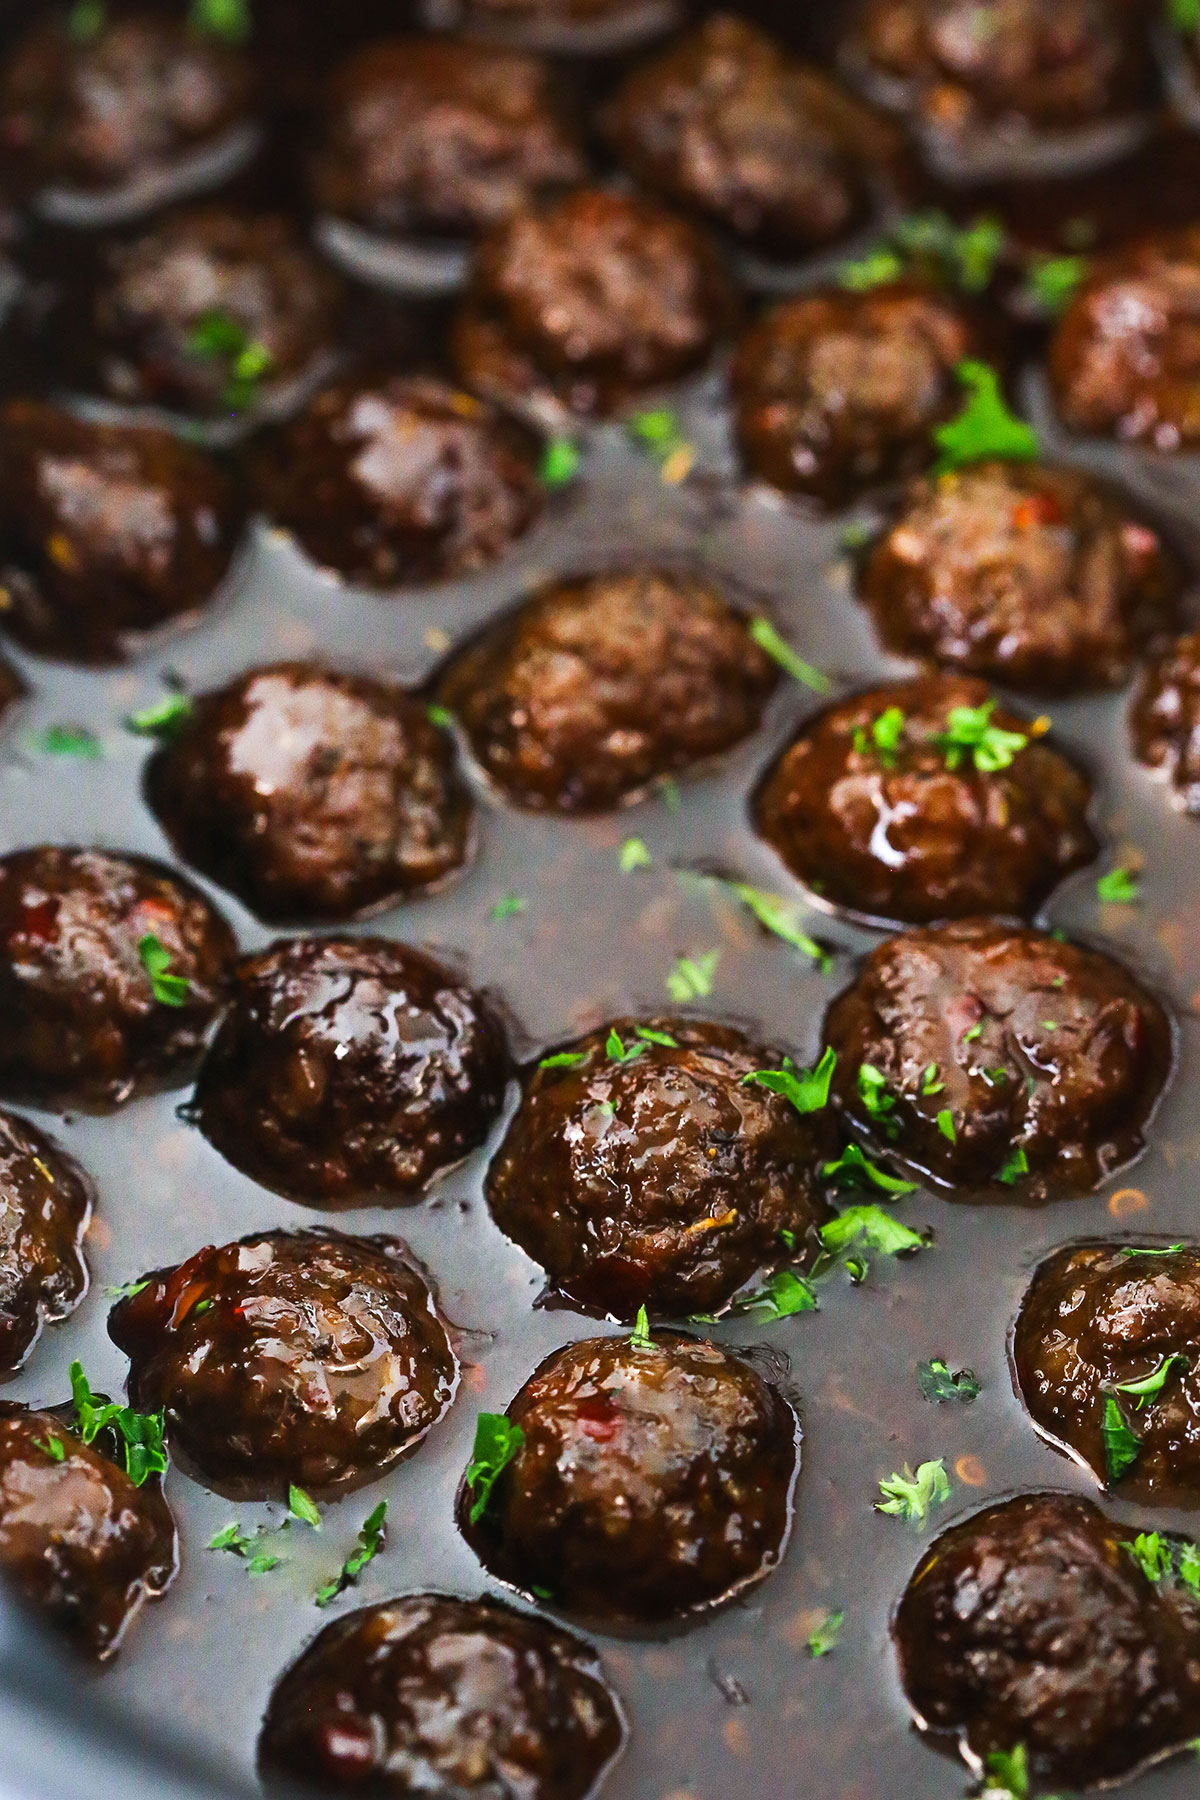 grape jelly meatballs with parsley partially submerged in sauce in crockpot